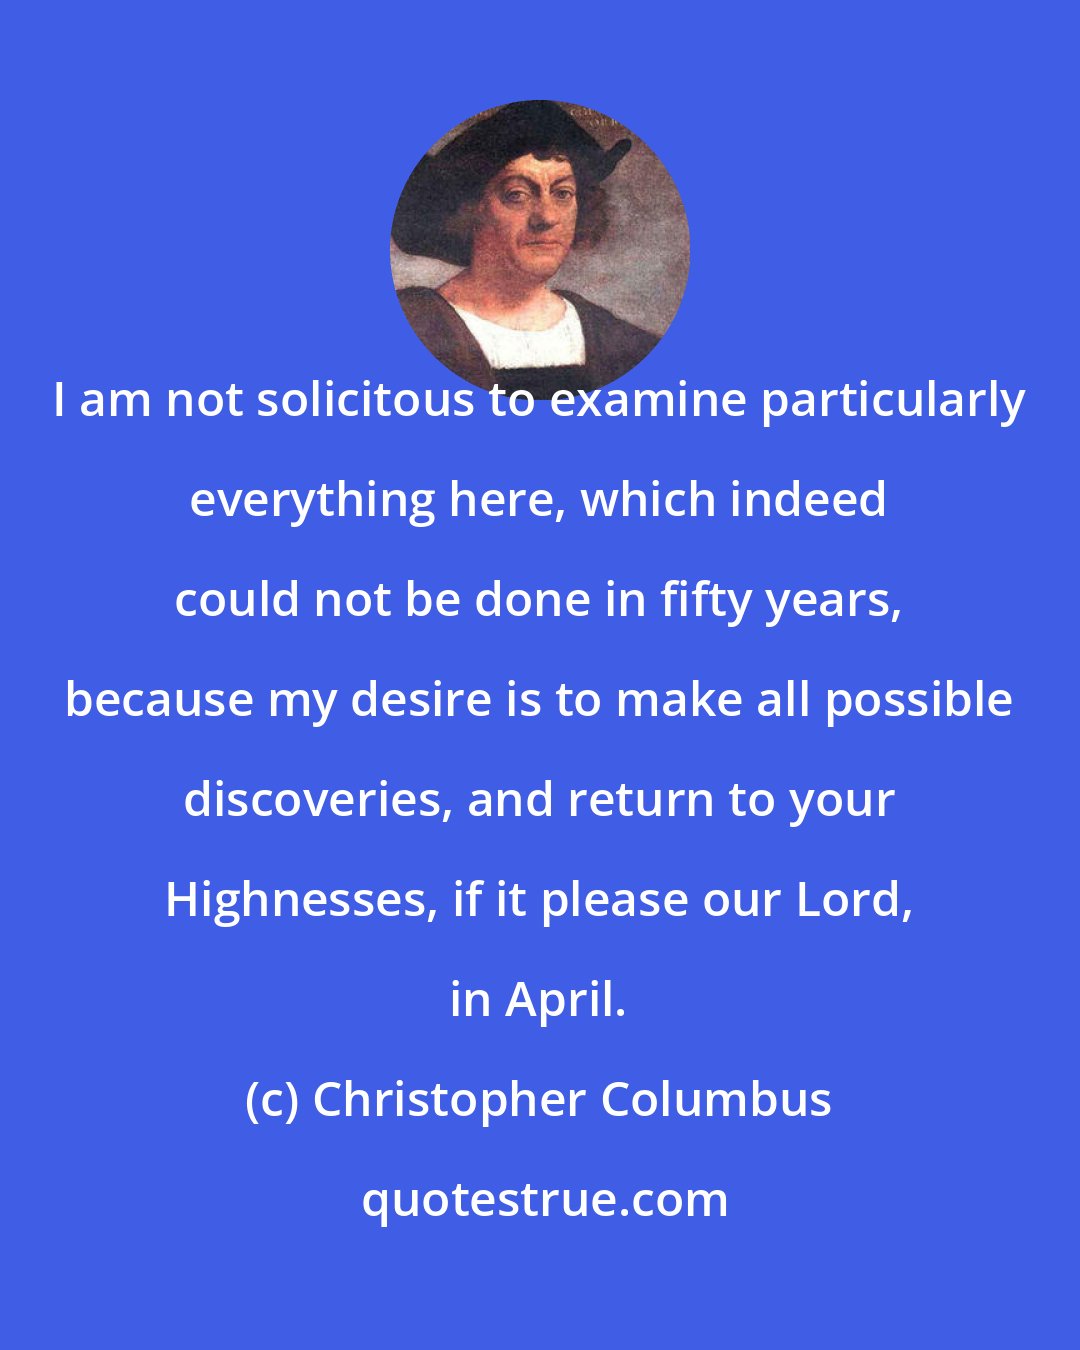 Christopher Columbus: I am not solicitous to examine particularly everything here, which indeed could not be done in fifty years, because my desire is to make all possible discoveries, and return to your Highnesses, if it please our Lord, in April.